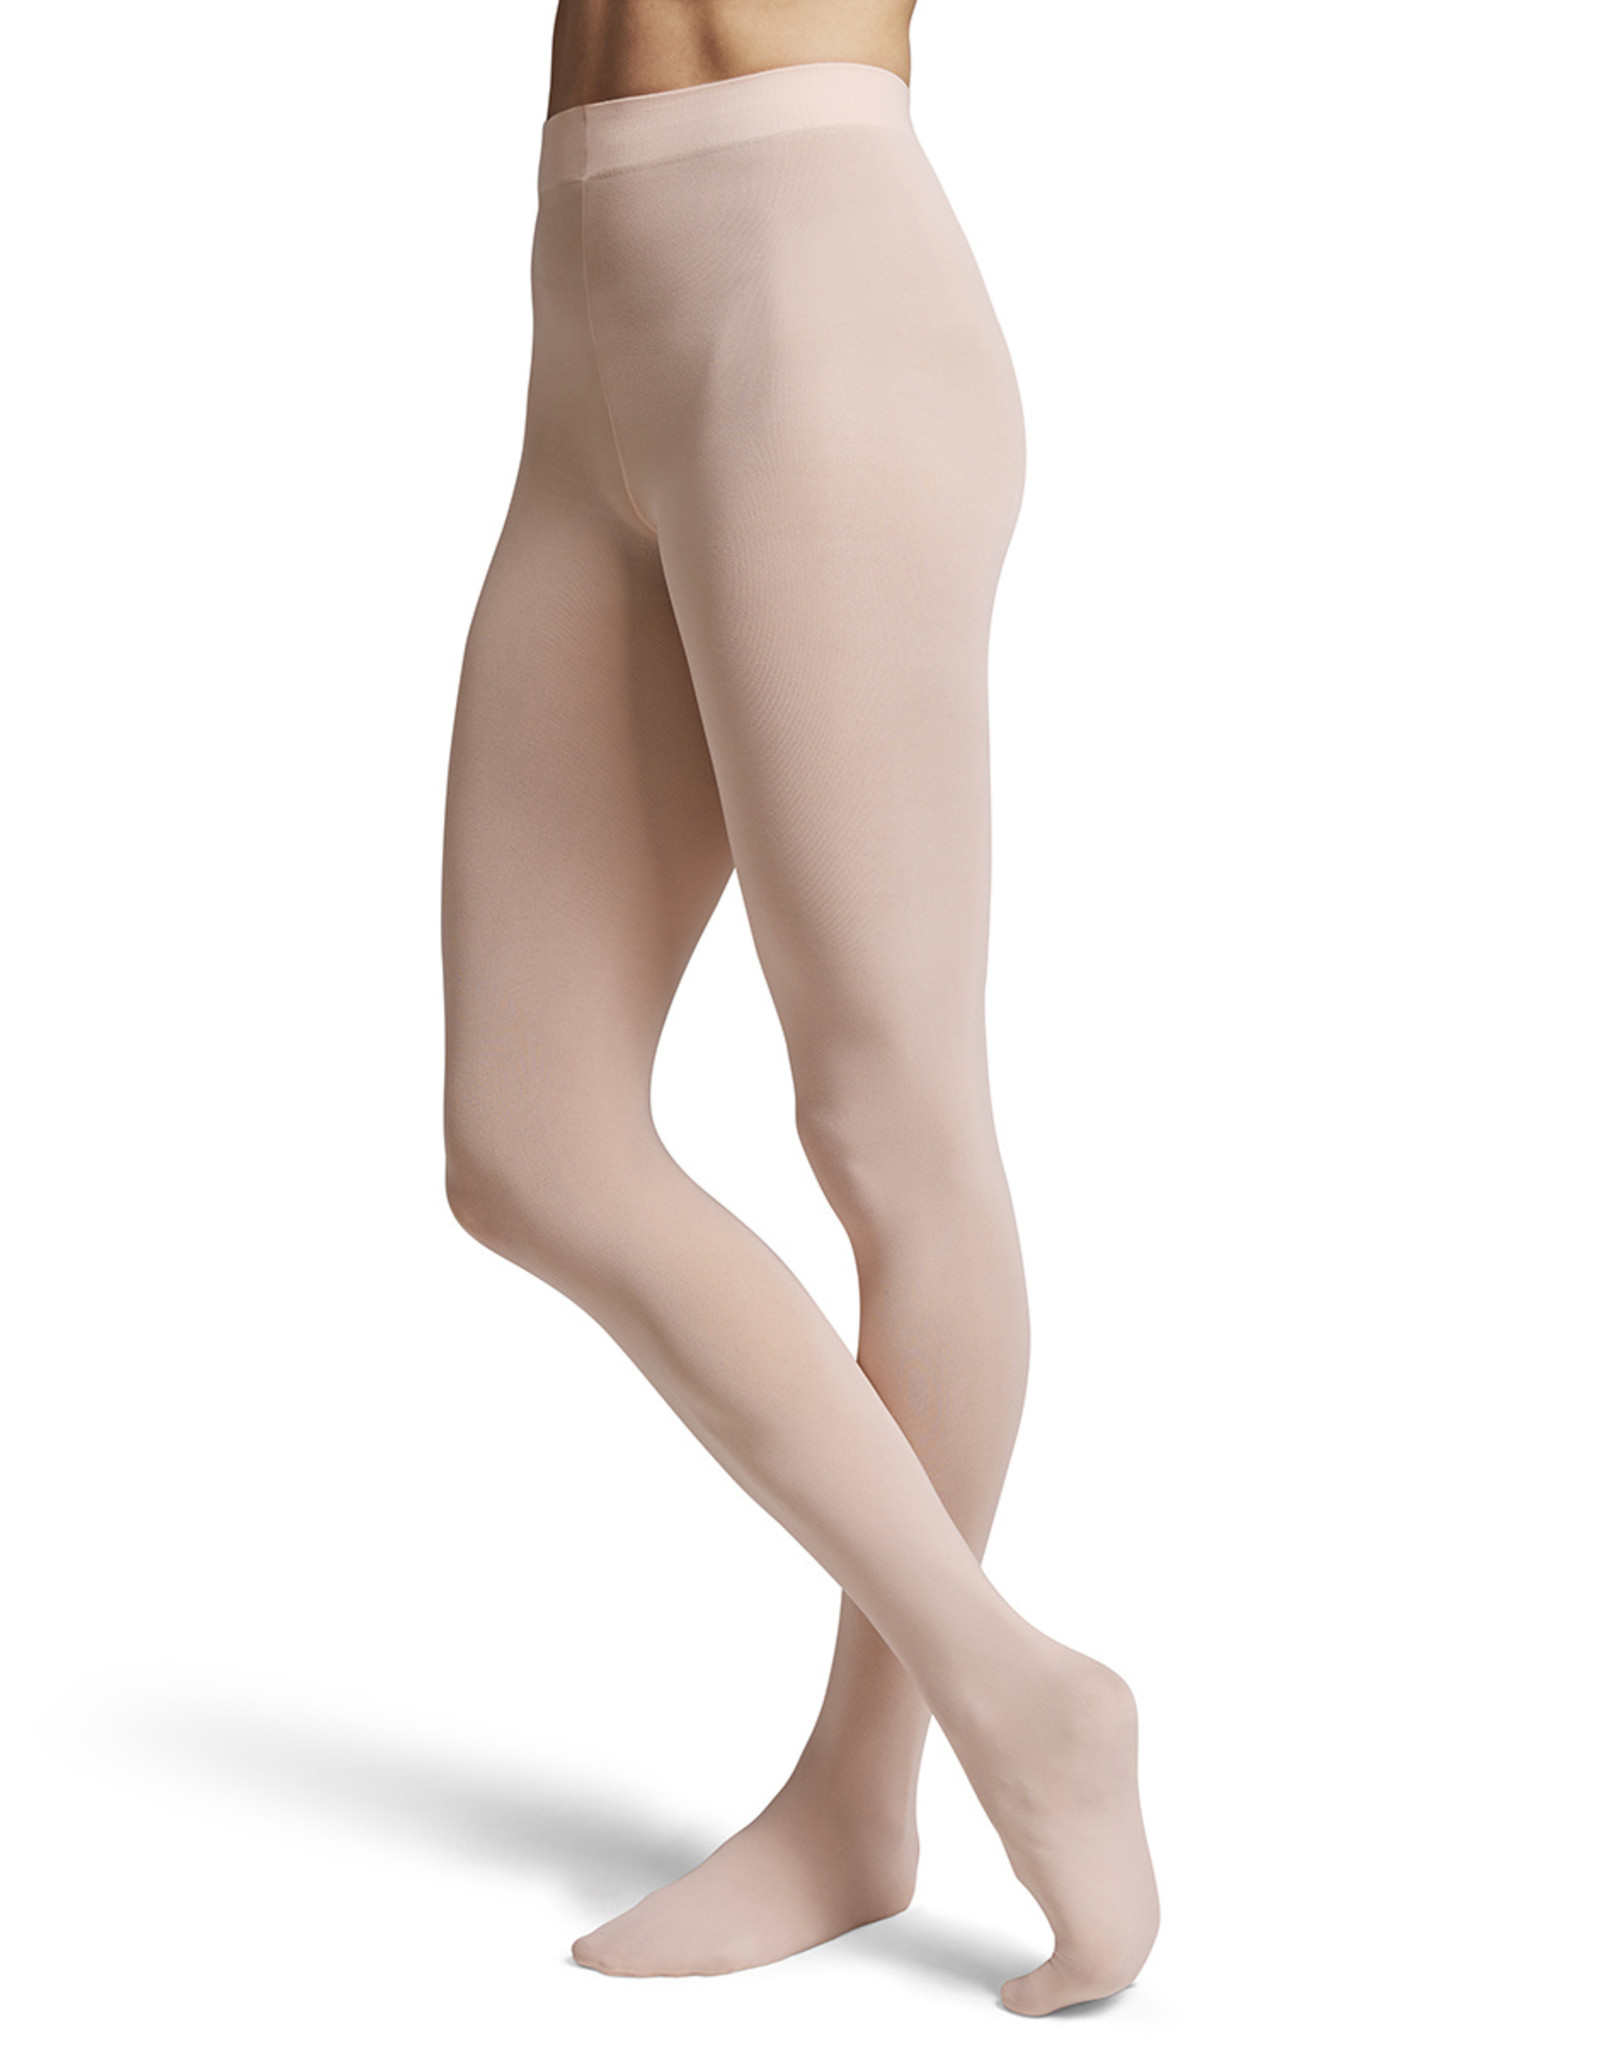 BLOCH® T0981G Childs Contoursoft Footed Tights